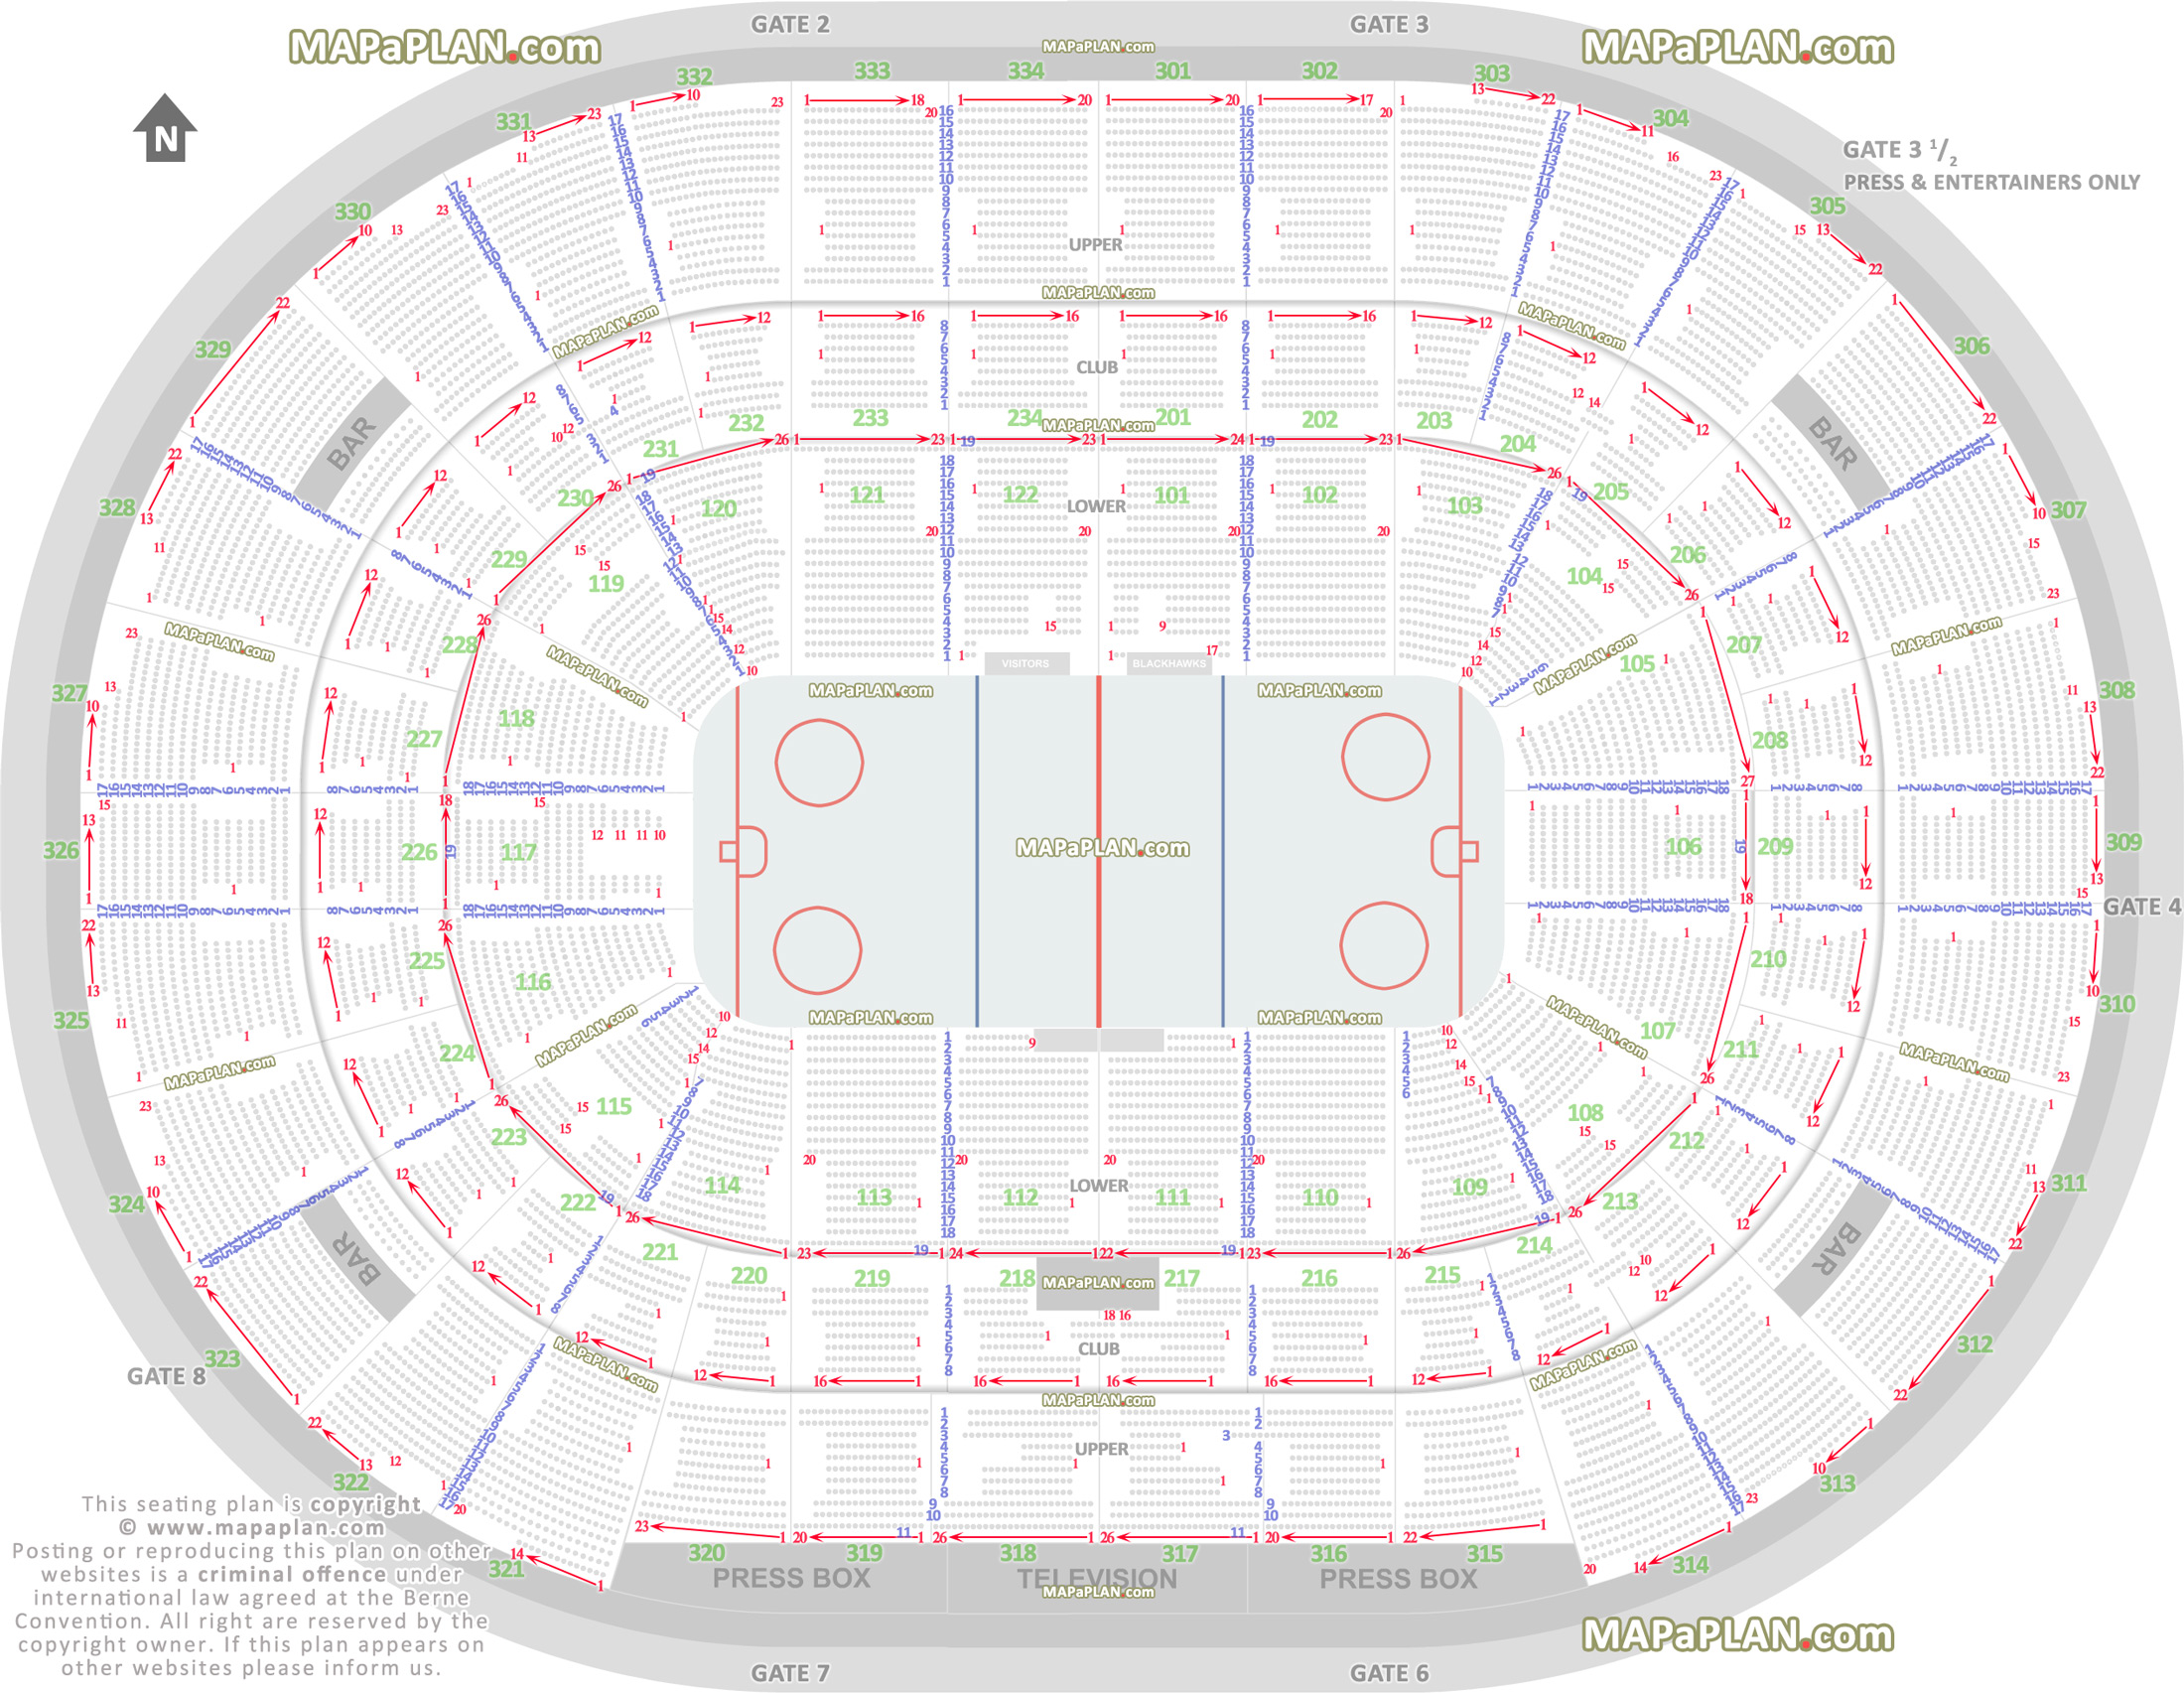 chicago blackhawks nhl hockey game rink diagram best seat finder chart precise aisle numbering data Chicago United Center seating chart